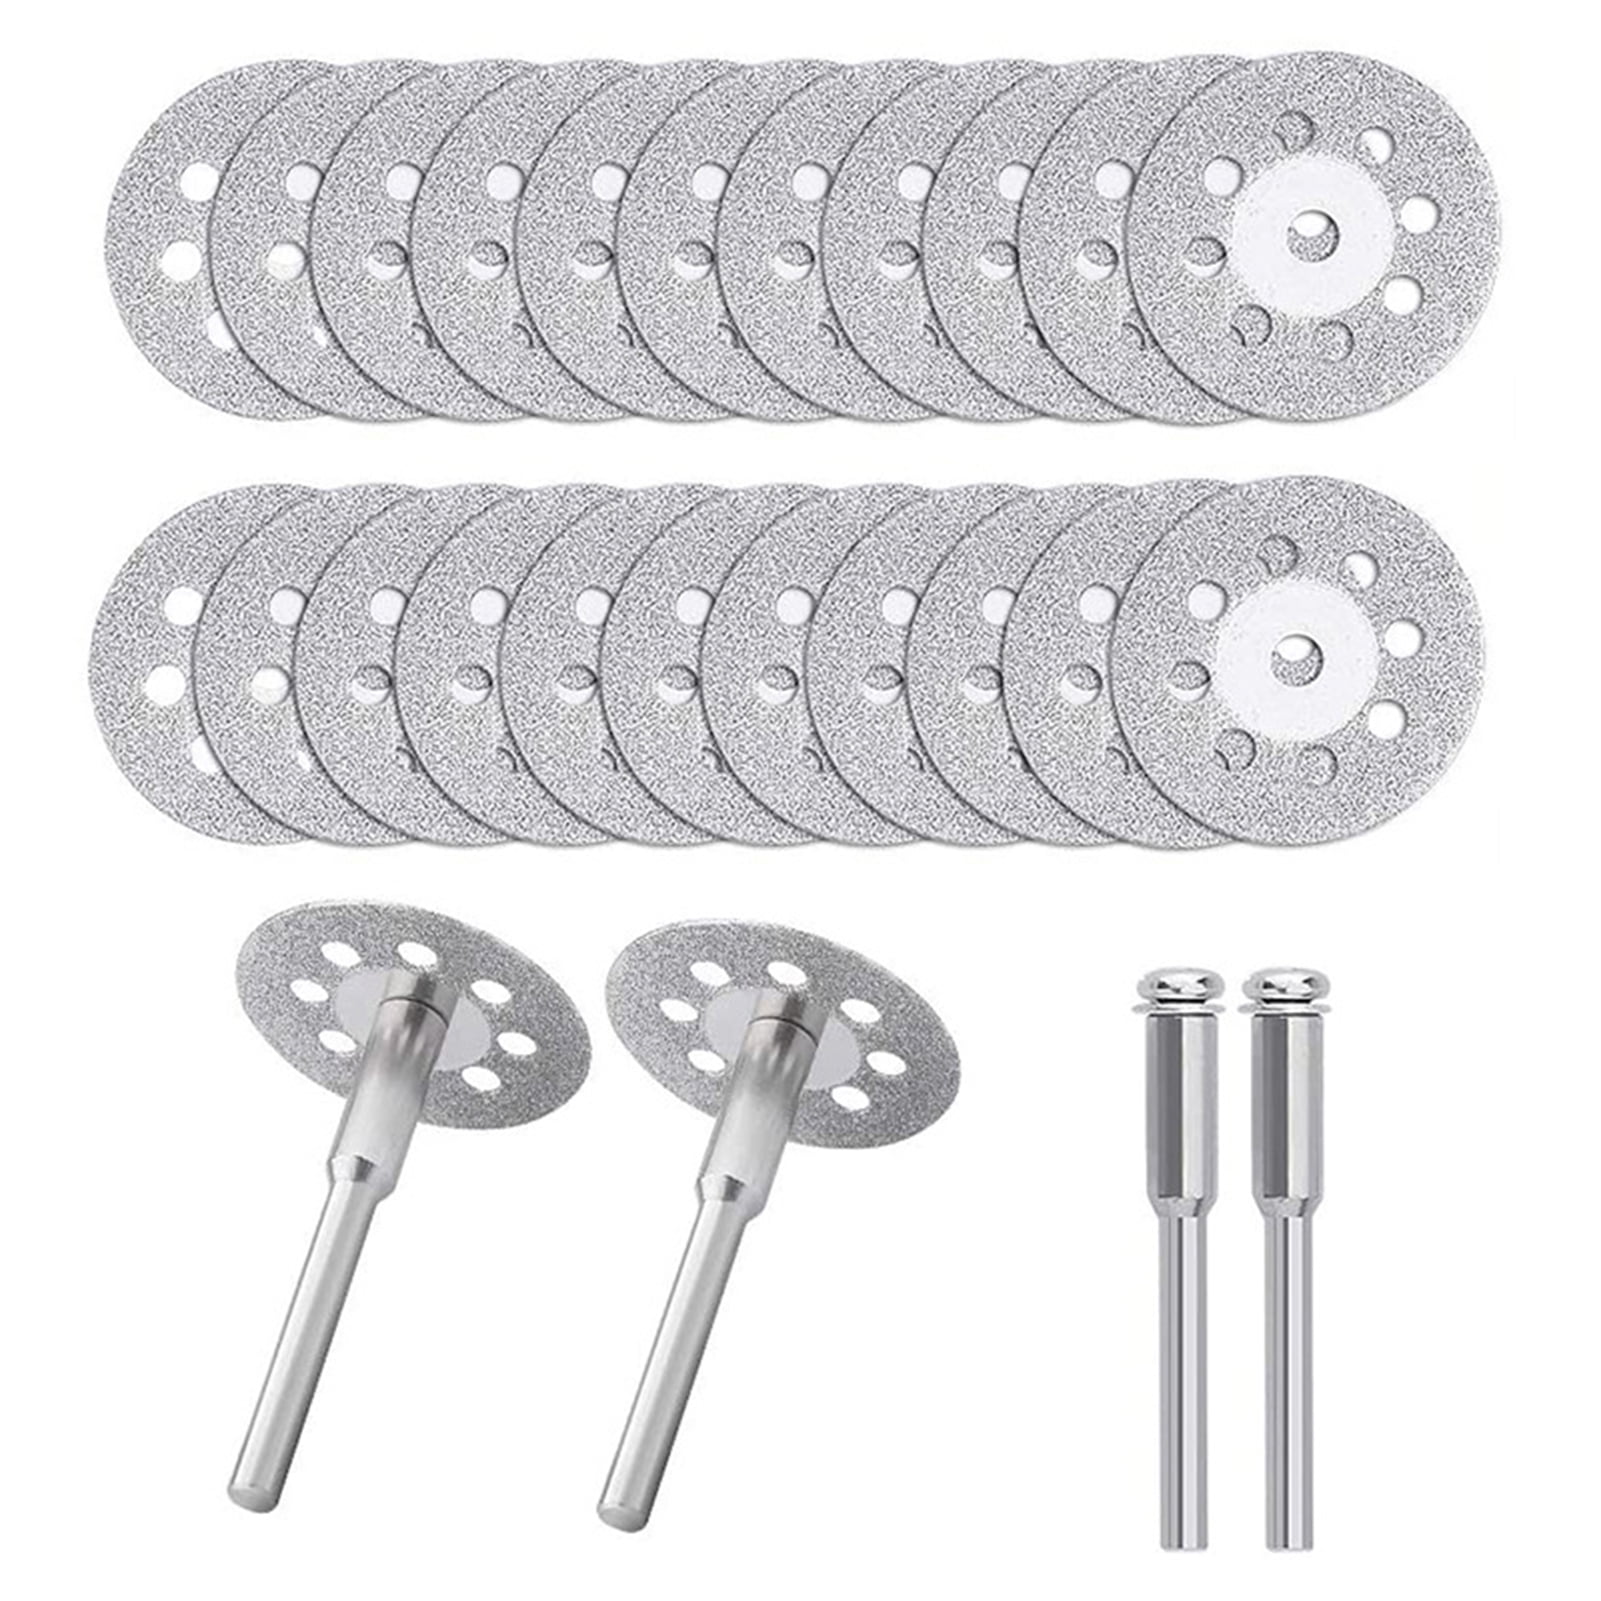 Hestya 20 Pieces 22 mm Diamond Cutting Wheel Cut Off Discs Coated Rotary Tools with 4 Pack Mandrel and 2 Pack Screwdriver 